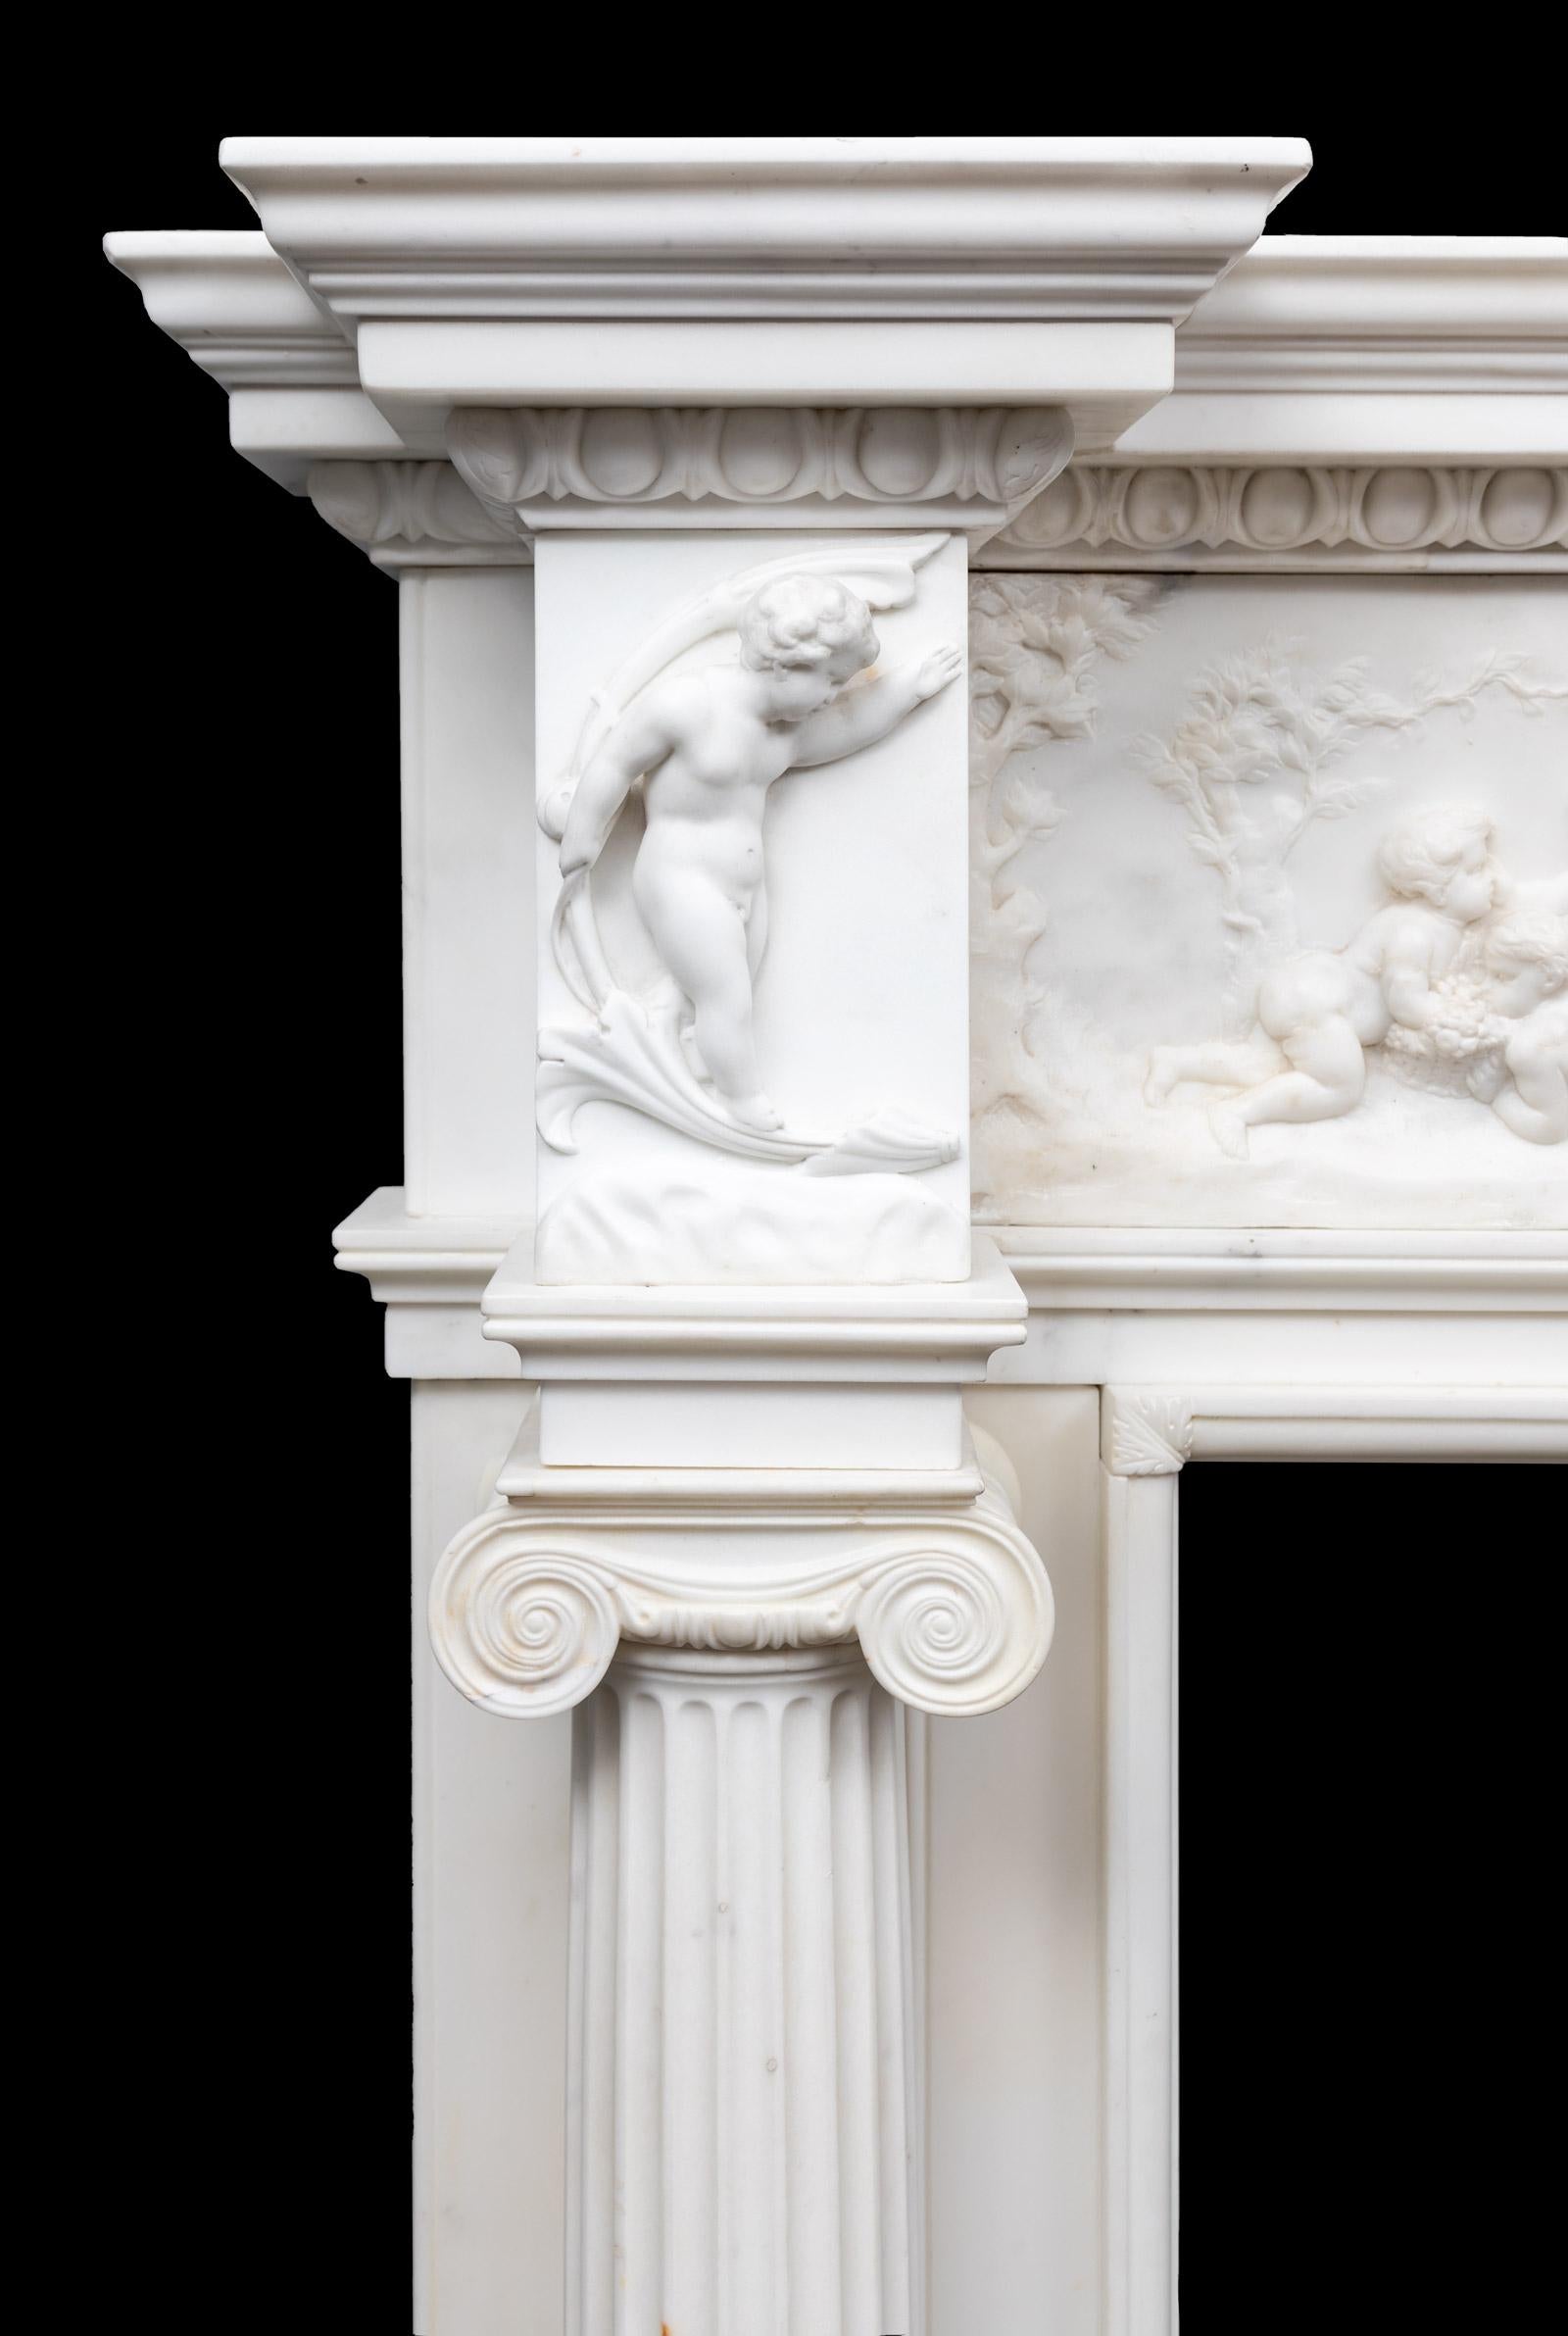 An exceptional antique carved white statuary marble chimneypiece from the late Georgian period.
With full free standing and fluted ionic columns under carved putti corner blocks. A substantial egg and dart cornice shelf rests on a finely carved